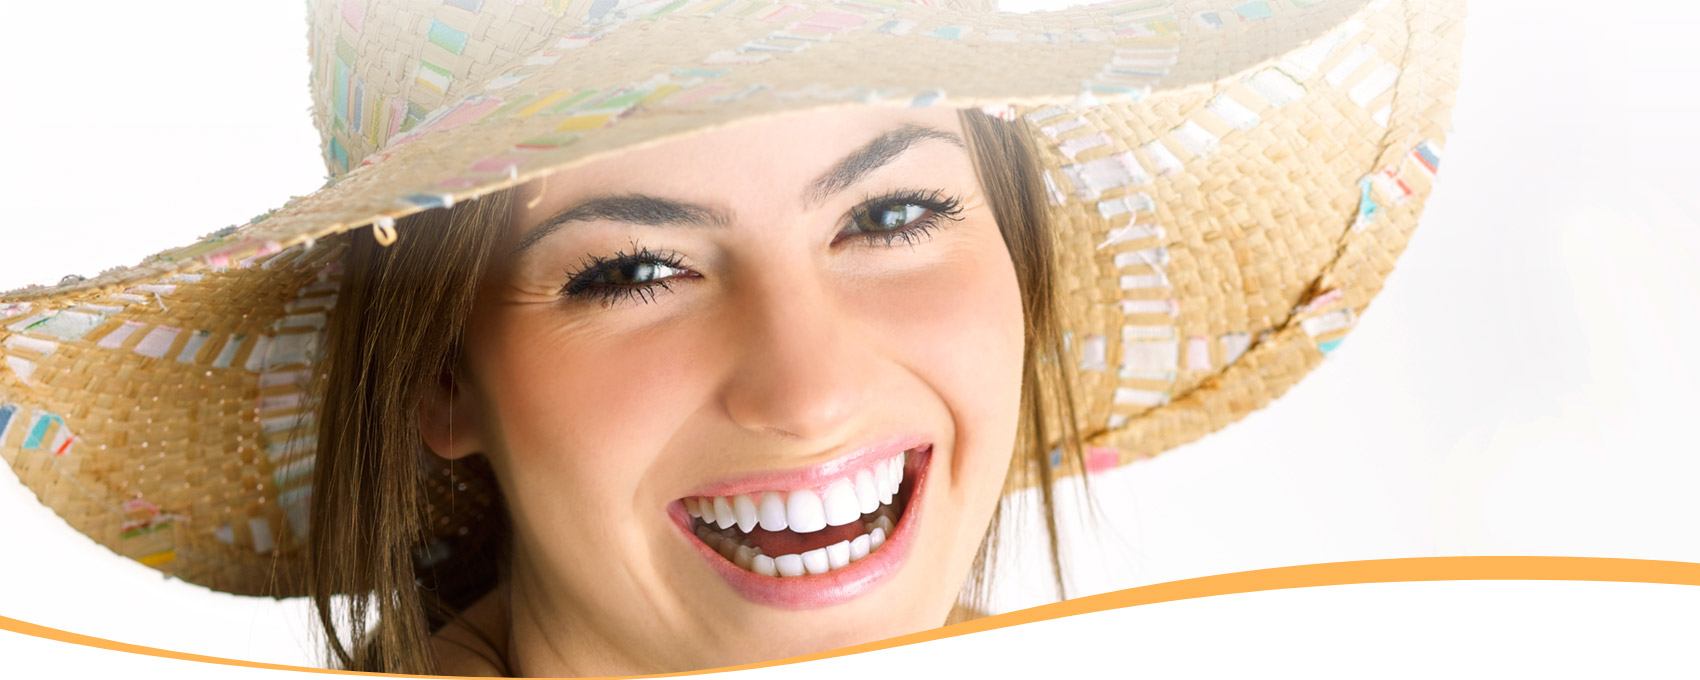 Get a beautiful smile - Natalie K. Provenzano DDS, Inc